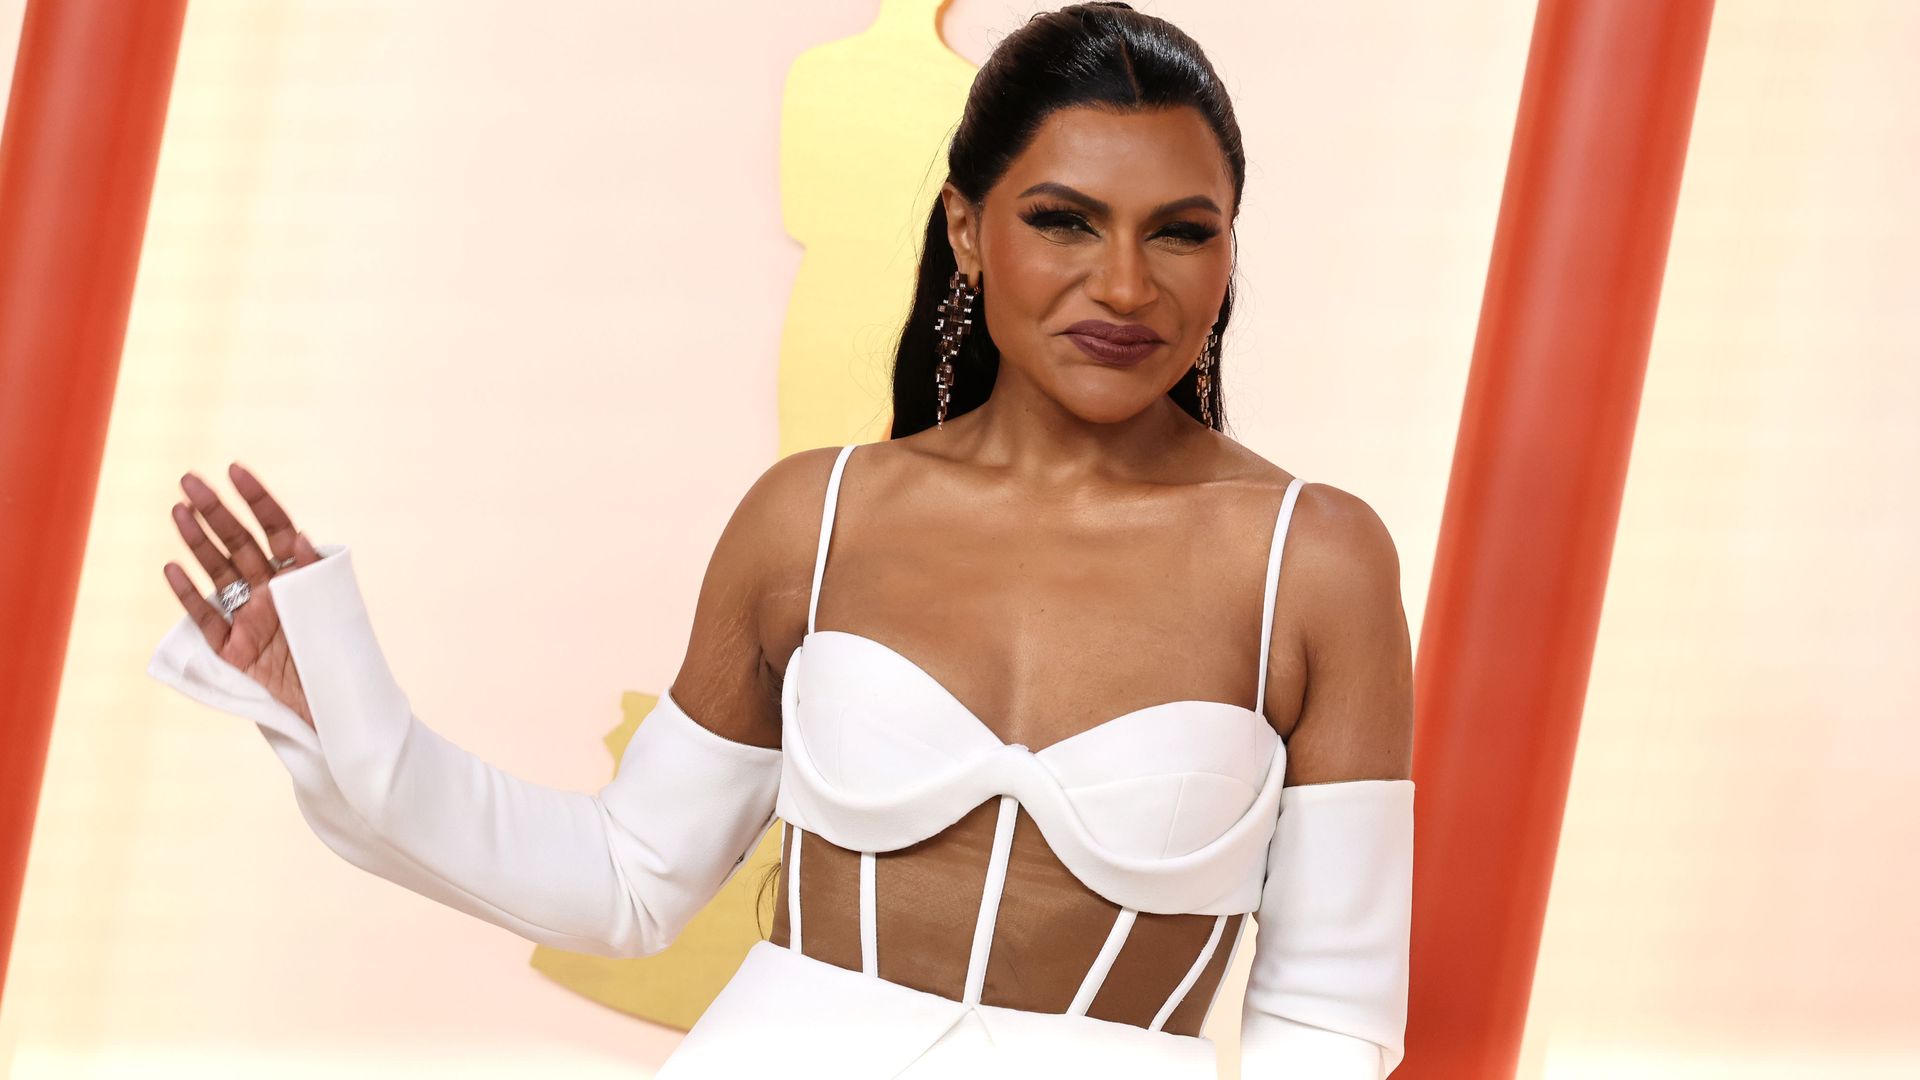 Mindy Kaling in a strappy white top